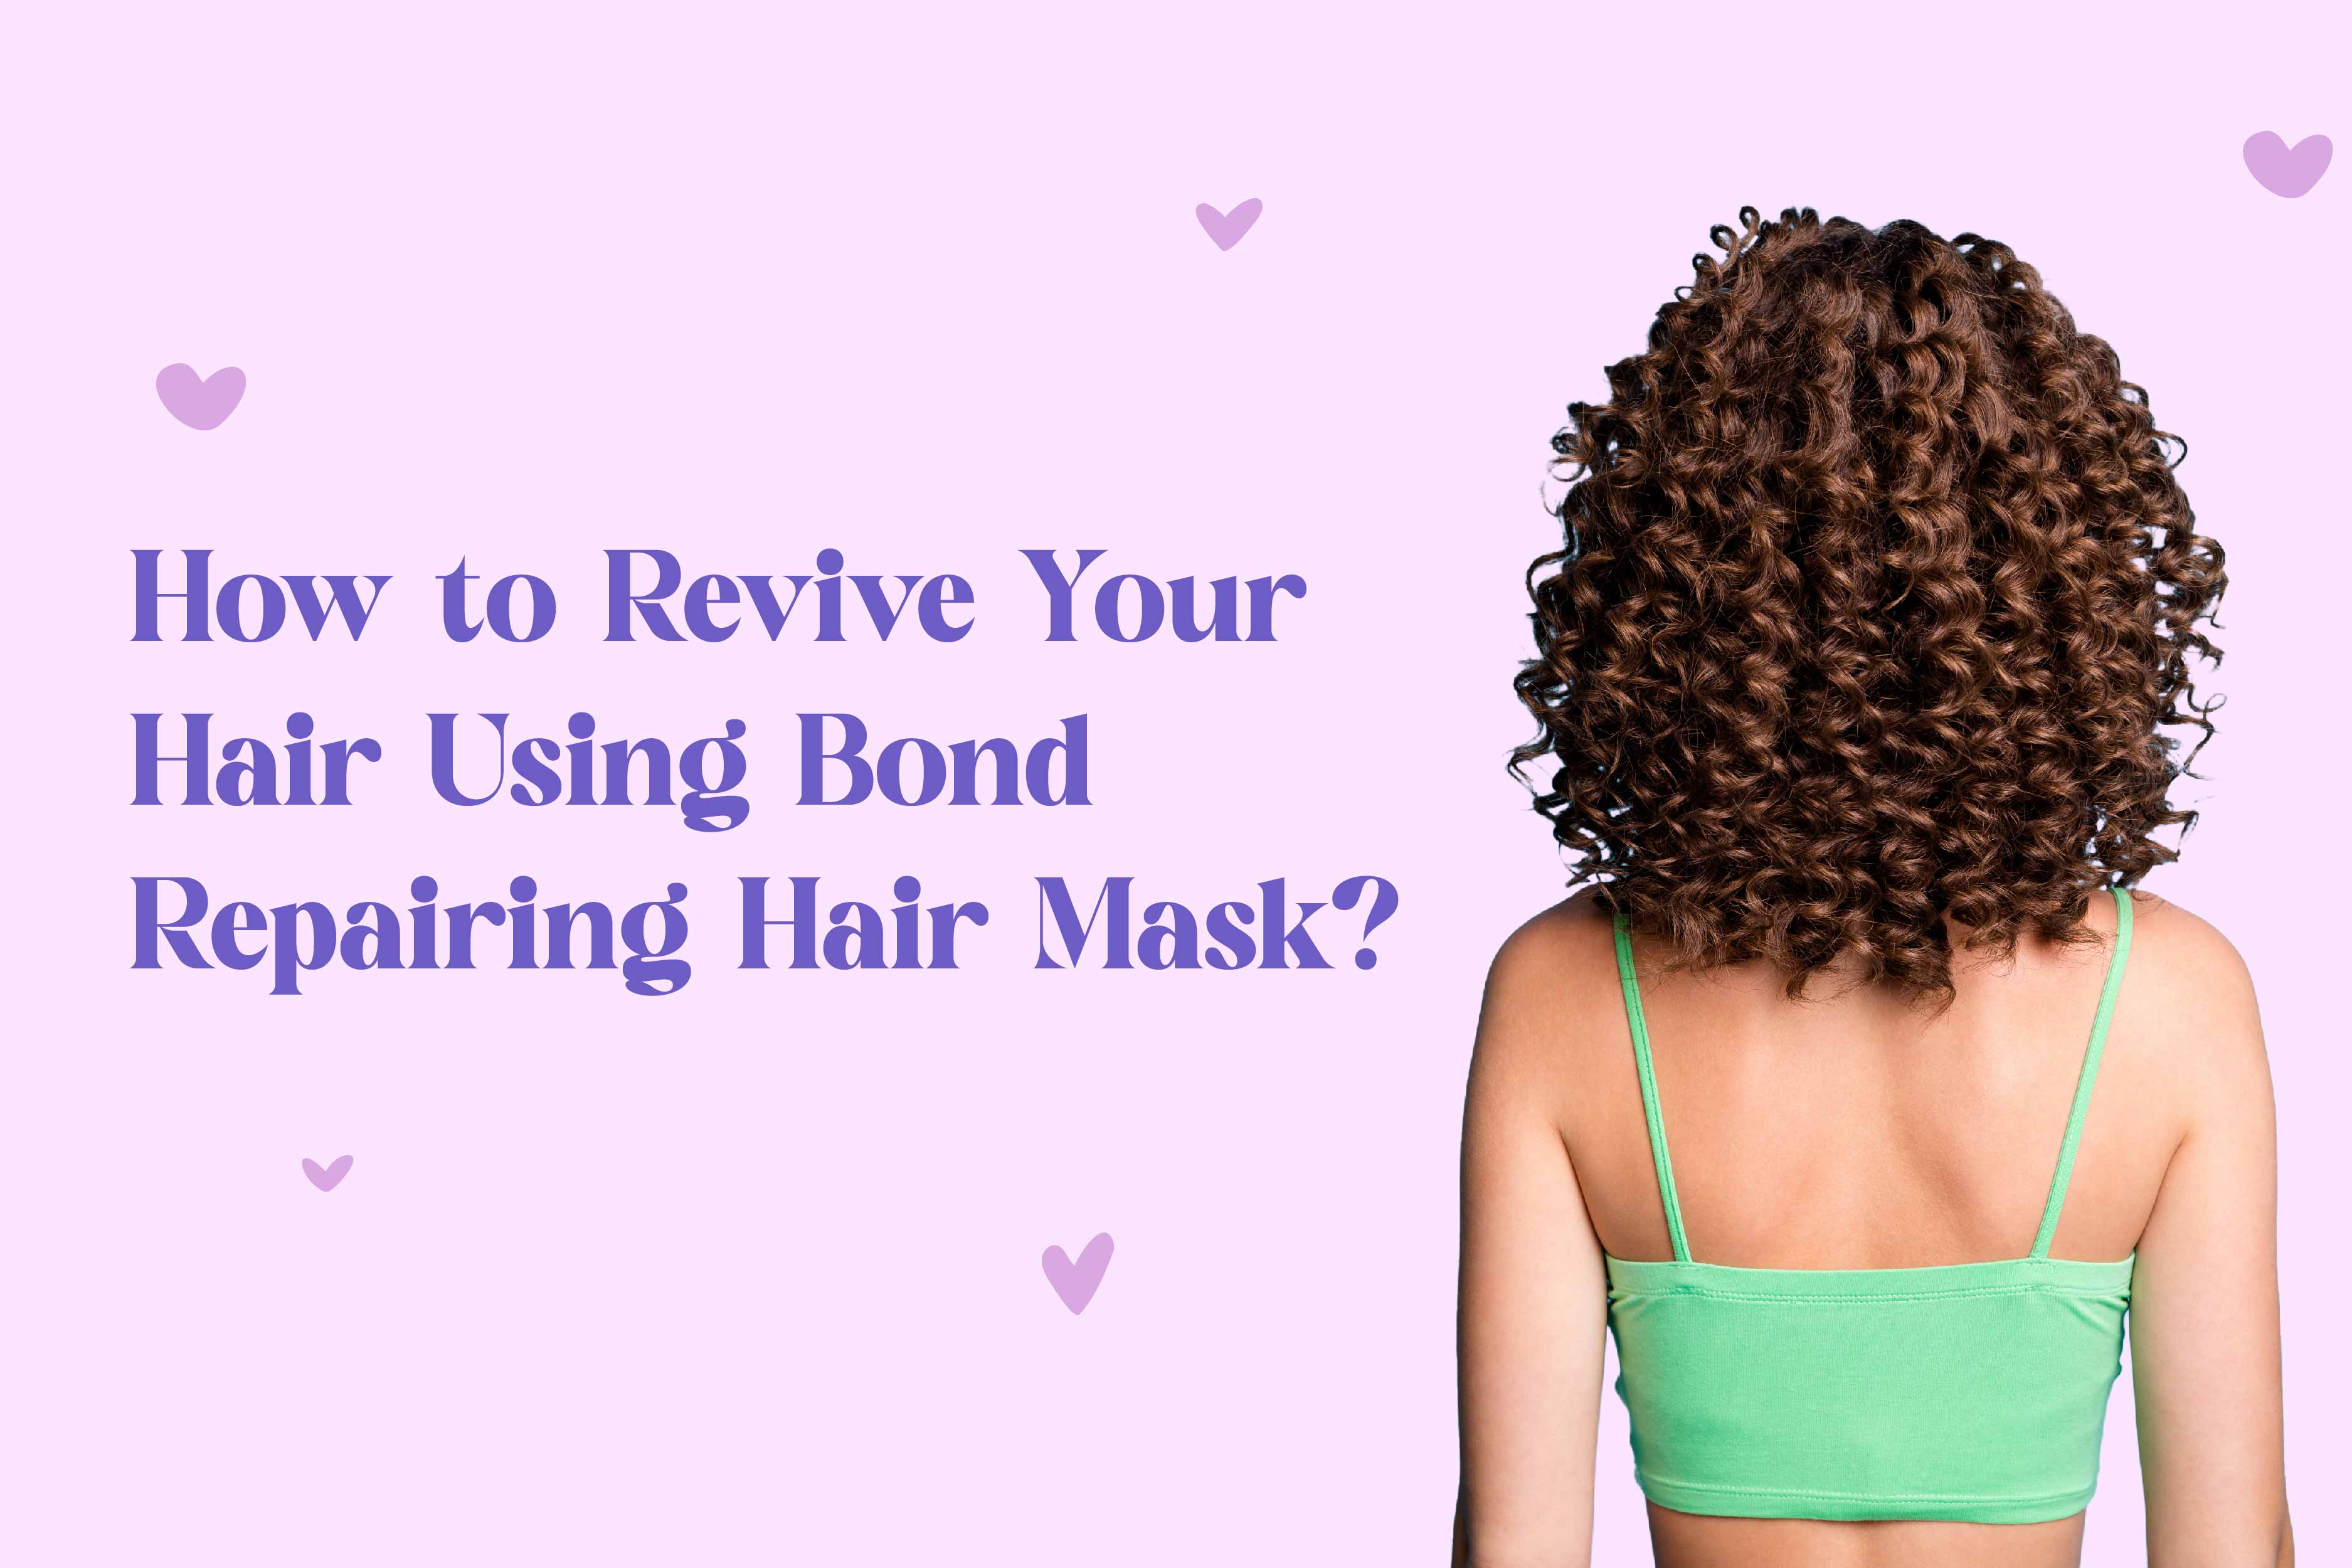 How to Revive Your Hair Using A Bond Repairing Hair Mask?